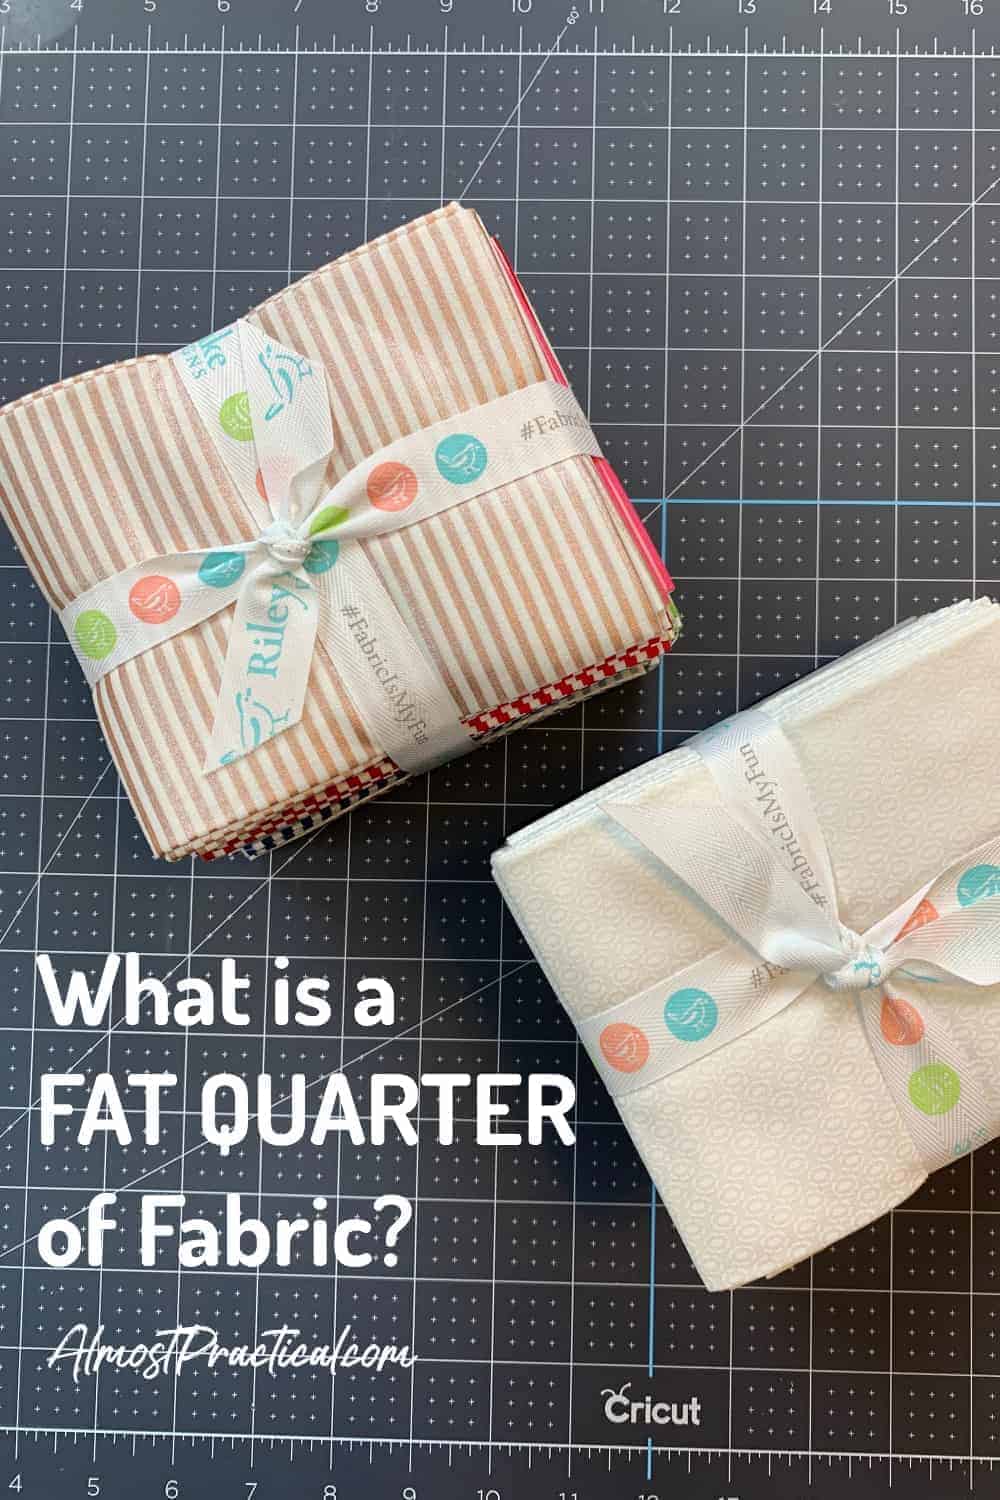 2 fat quarter stacks of fabric in strips and white tied with ribbon from Riley Blake and sold at Cricut